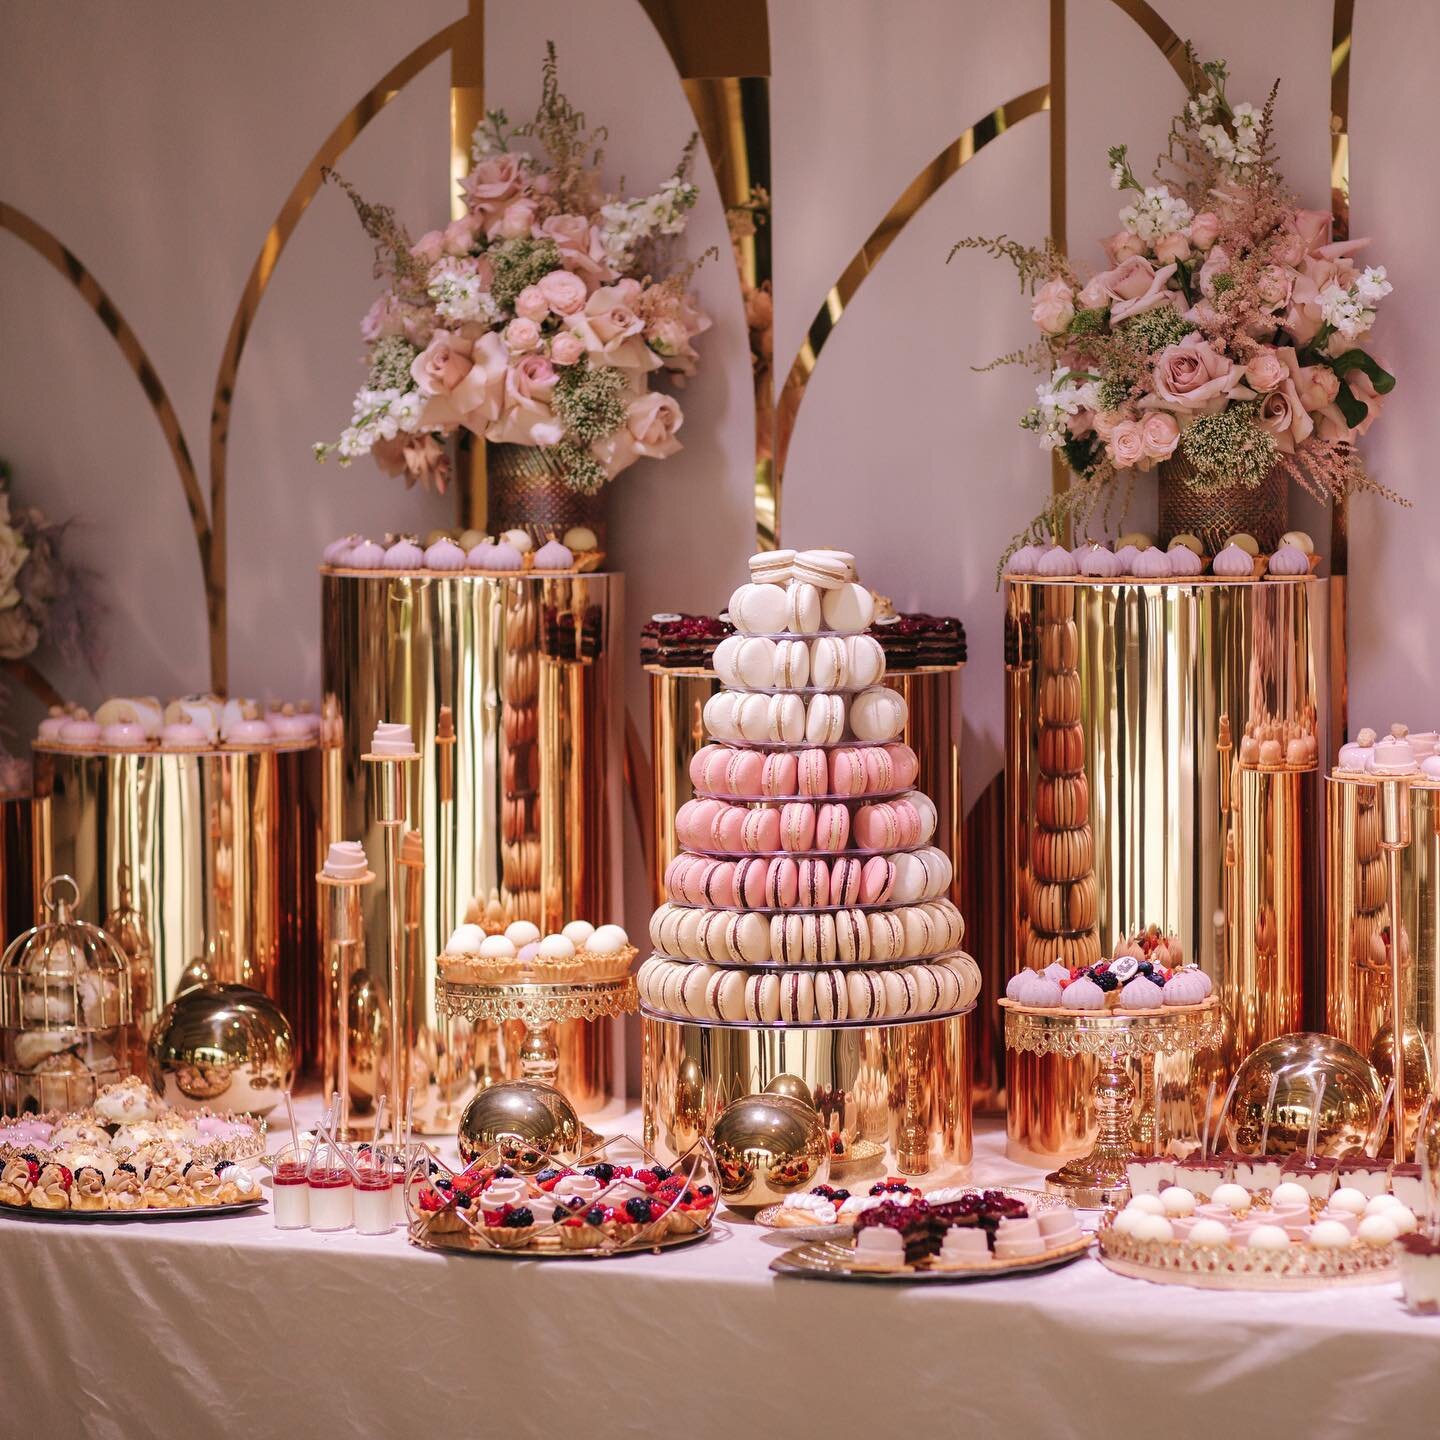 Satisfy your guest's sweet tooth with the dessert bar of your dreams at your next Experience. 🧁

Bring in your own caterer or choose from our preferred list of local vendors.

Let's chat about hosting your next Experience with us. Fill out a contact